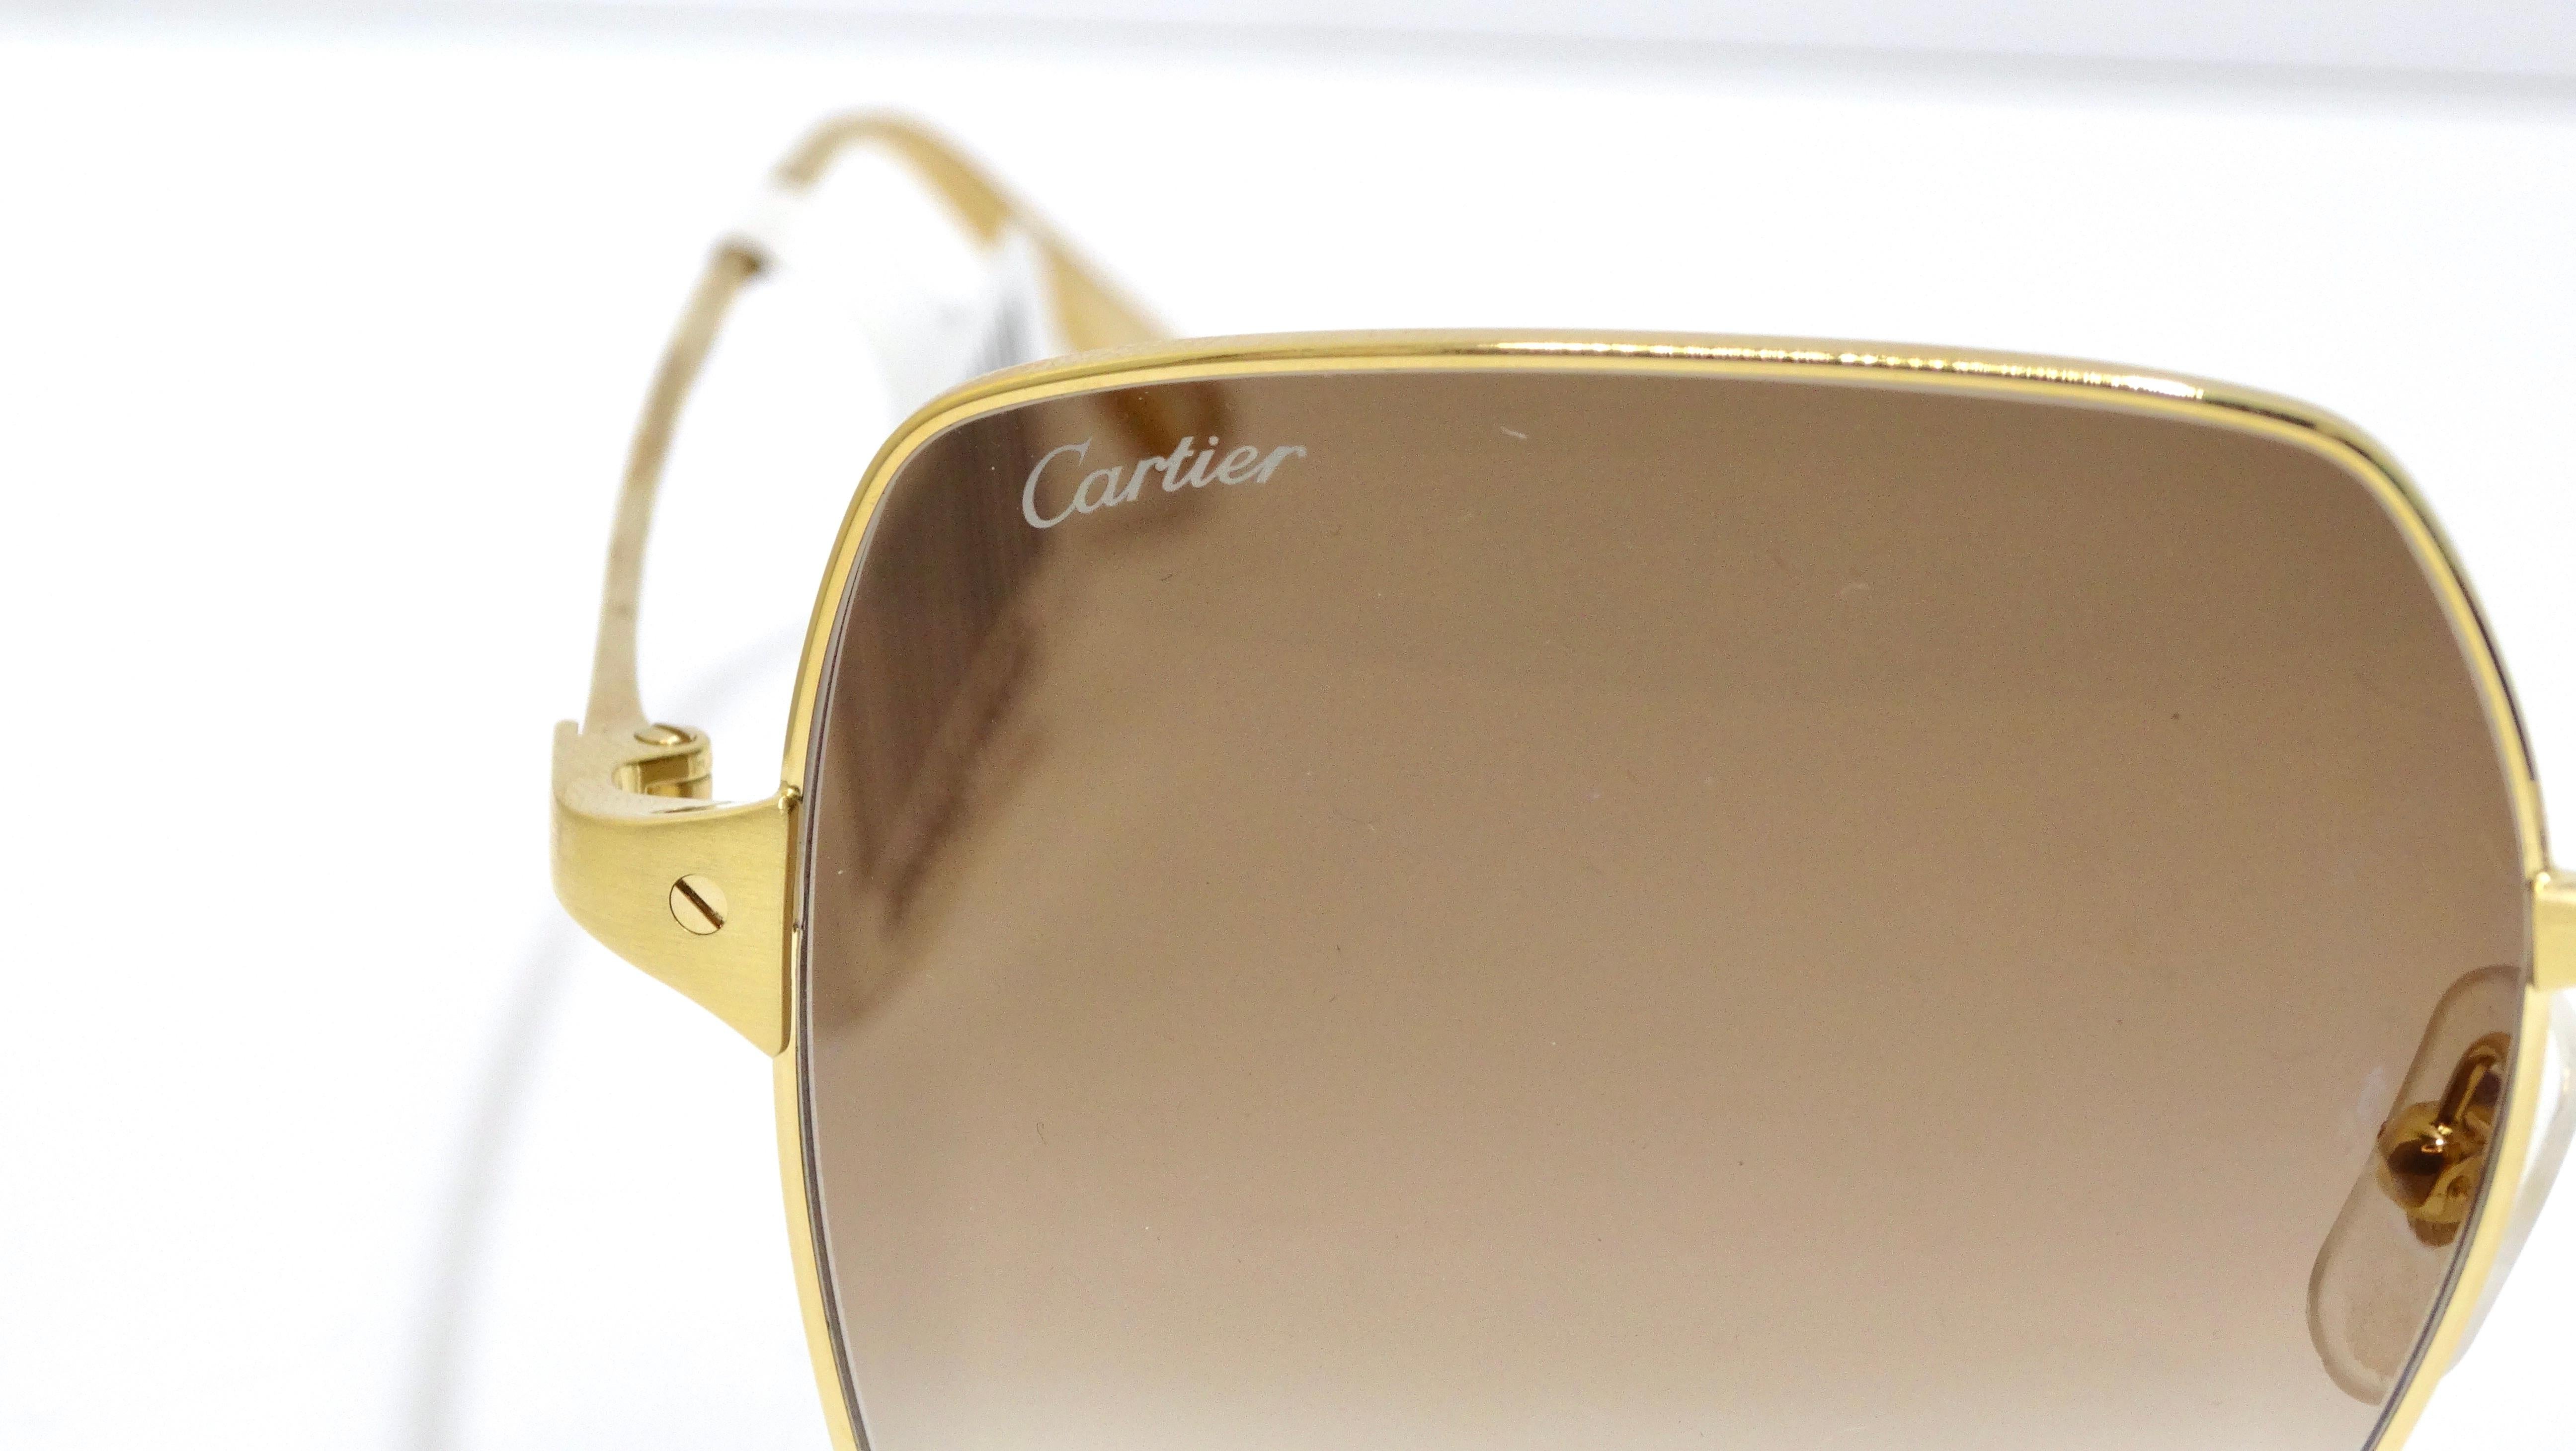 A classic yet stunning piece you need in your eye-wear collection. These Cartier sunglasses will never fail you as the quality is pristine and the sleek and neutral design will pair with anything you have in mind. Cartier was founded in 1847 by